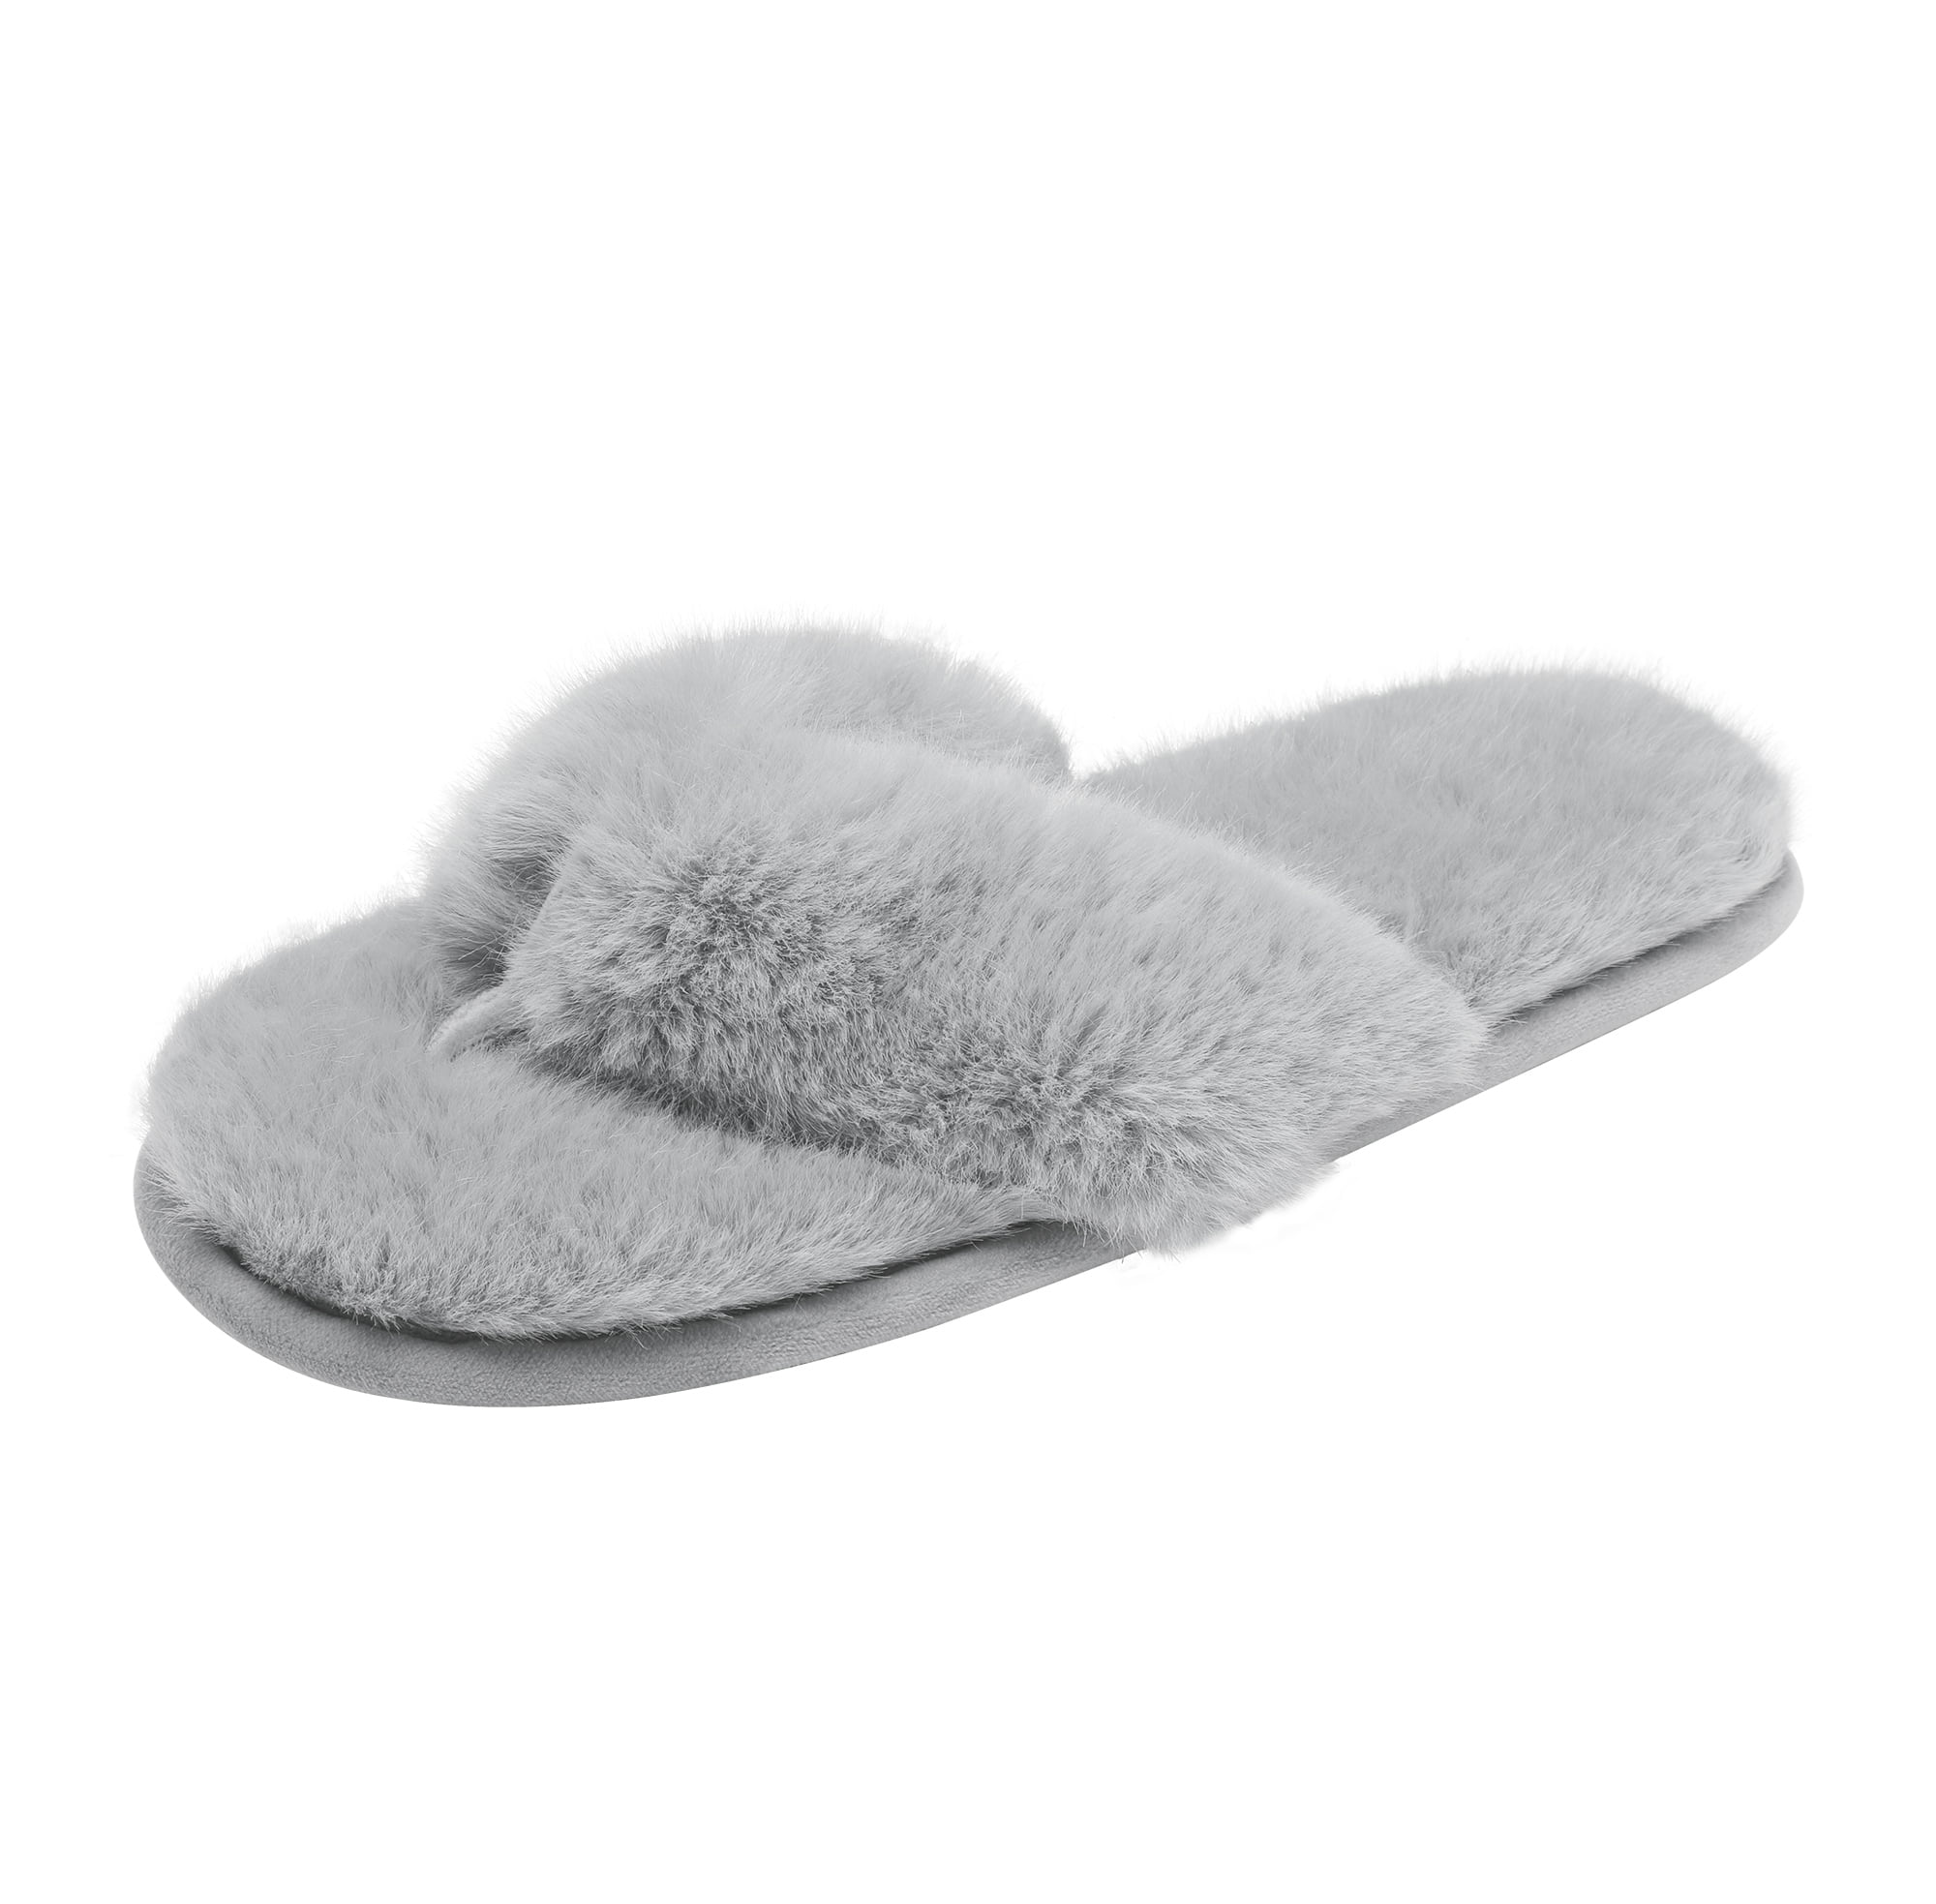 New Womens Ladies Warm Fur Lined Winter Cosy Faux Leather Emily Mules Slippers 